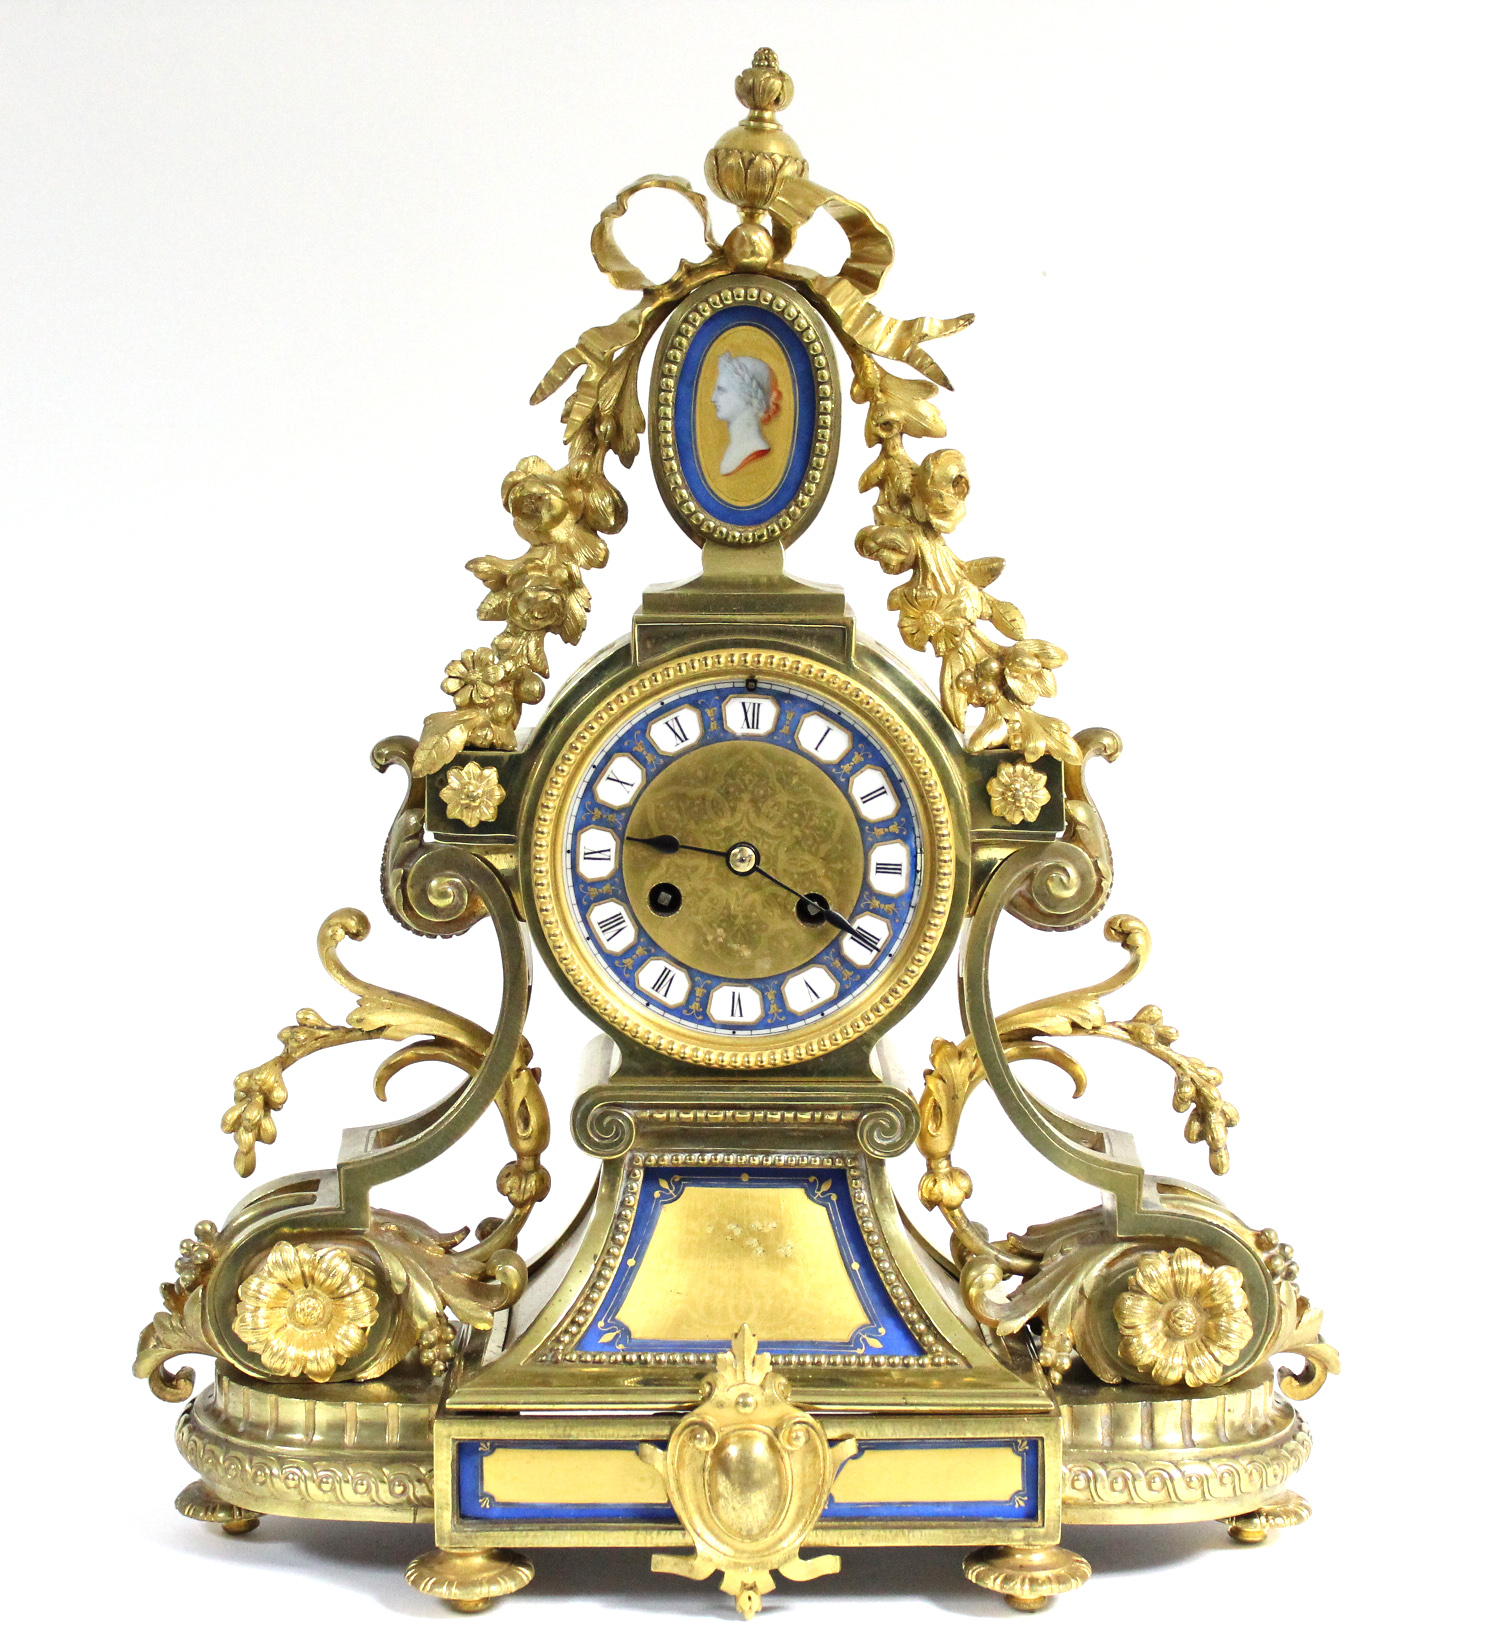 A mid-19th century French mantel clock in elaborate gilt brass case with pendant flowers & leaf-